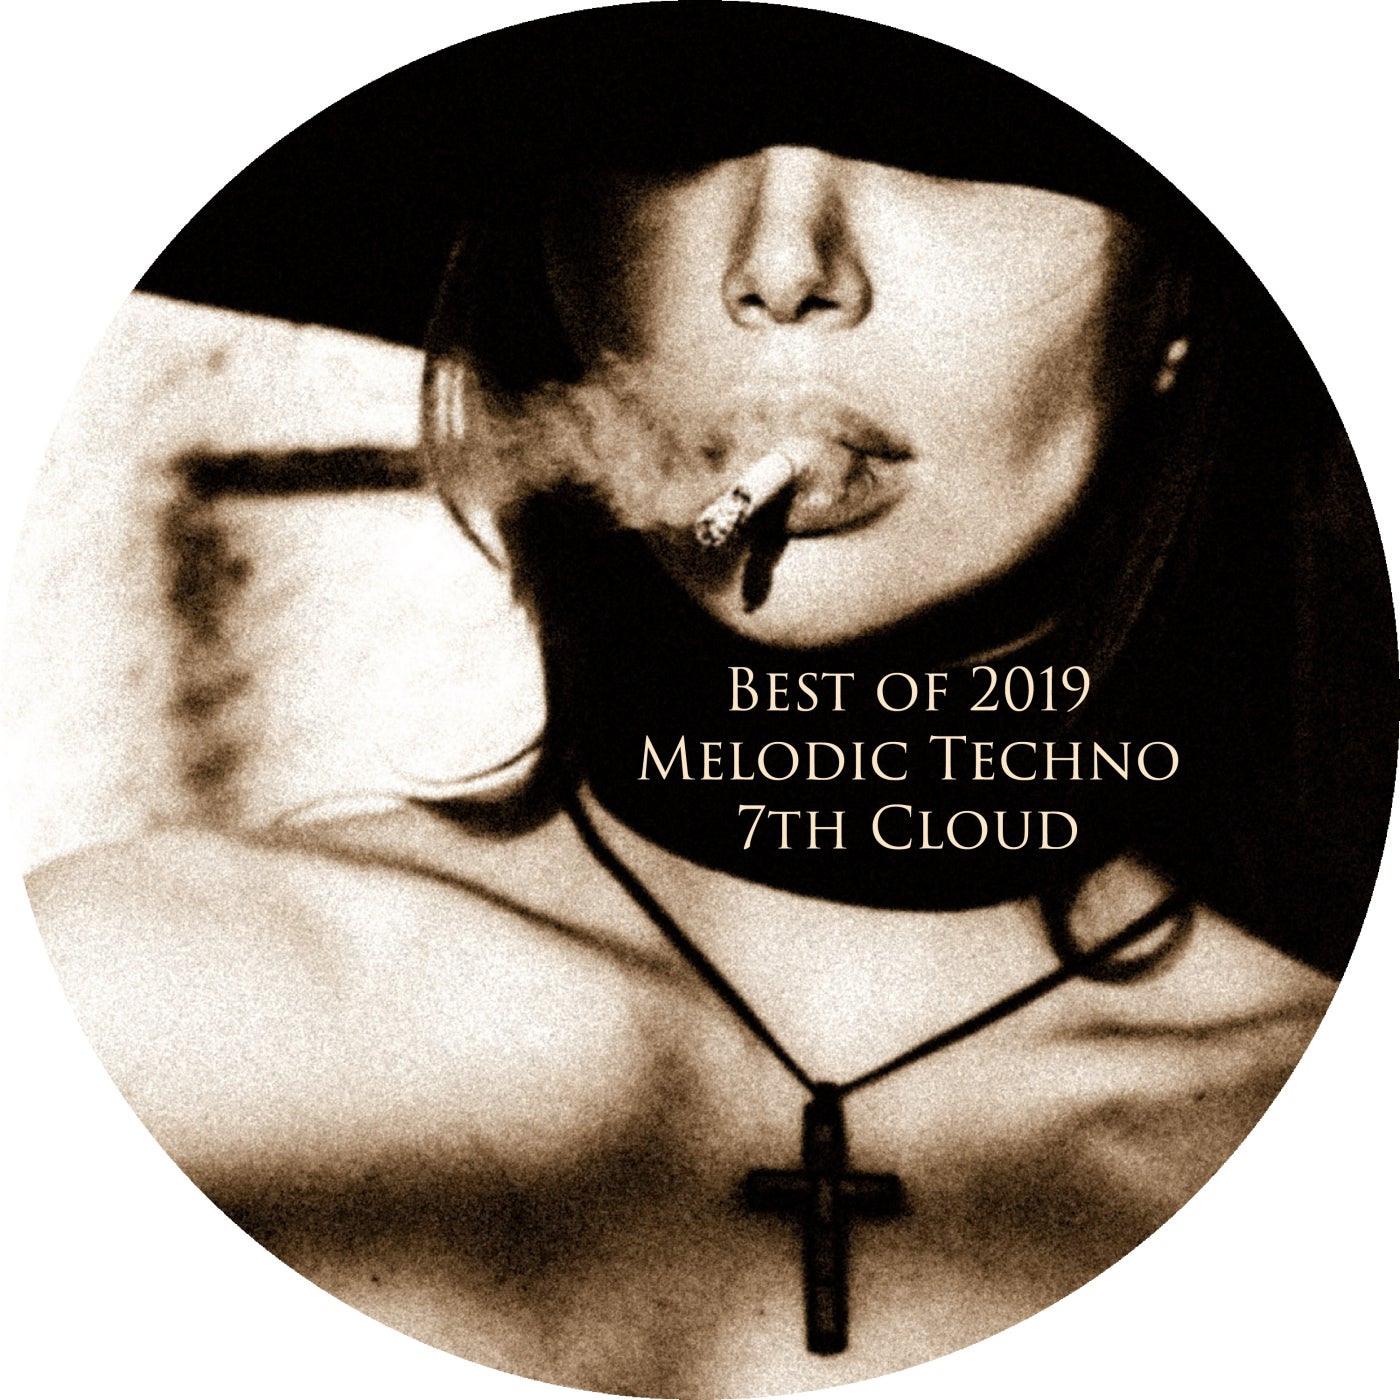 Best of Melodic Techno 2019 = 7th Cloud